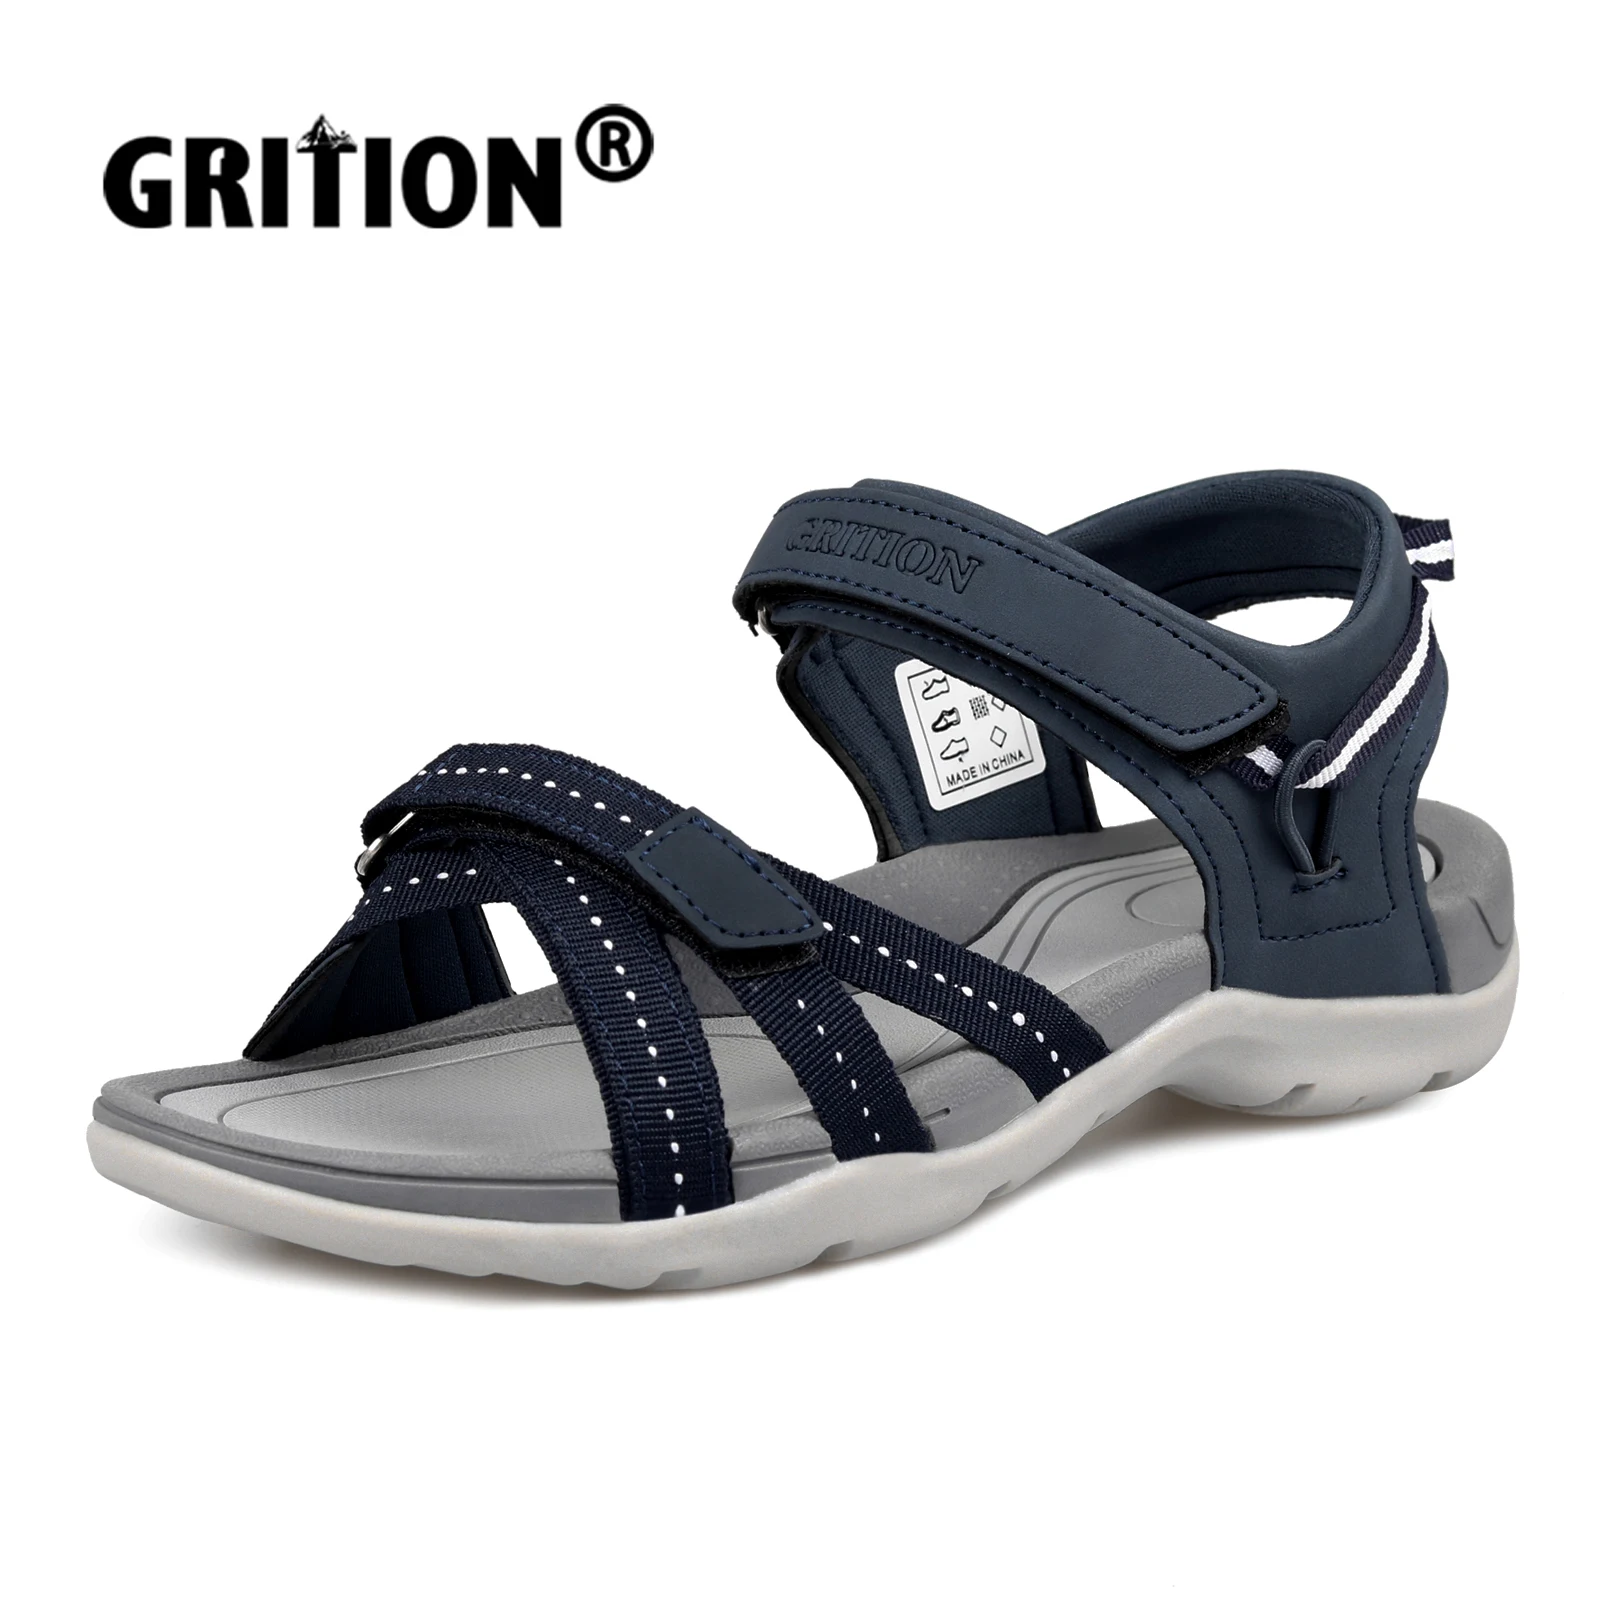 GRITION Womens Flat Sandals Beach Outdoor Casual Fashion Non Slip Light PU Rubber Breathable Trekking Summer Sand 2022 Size 41